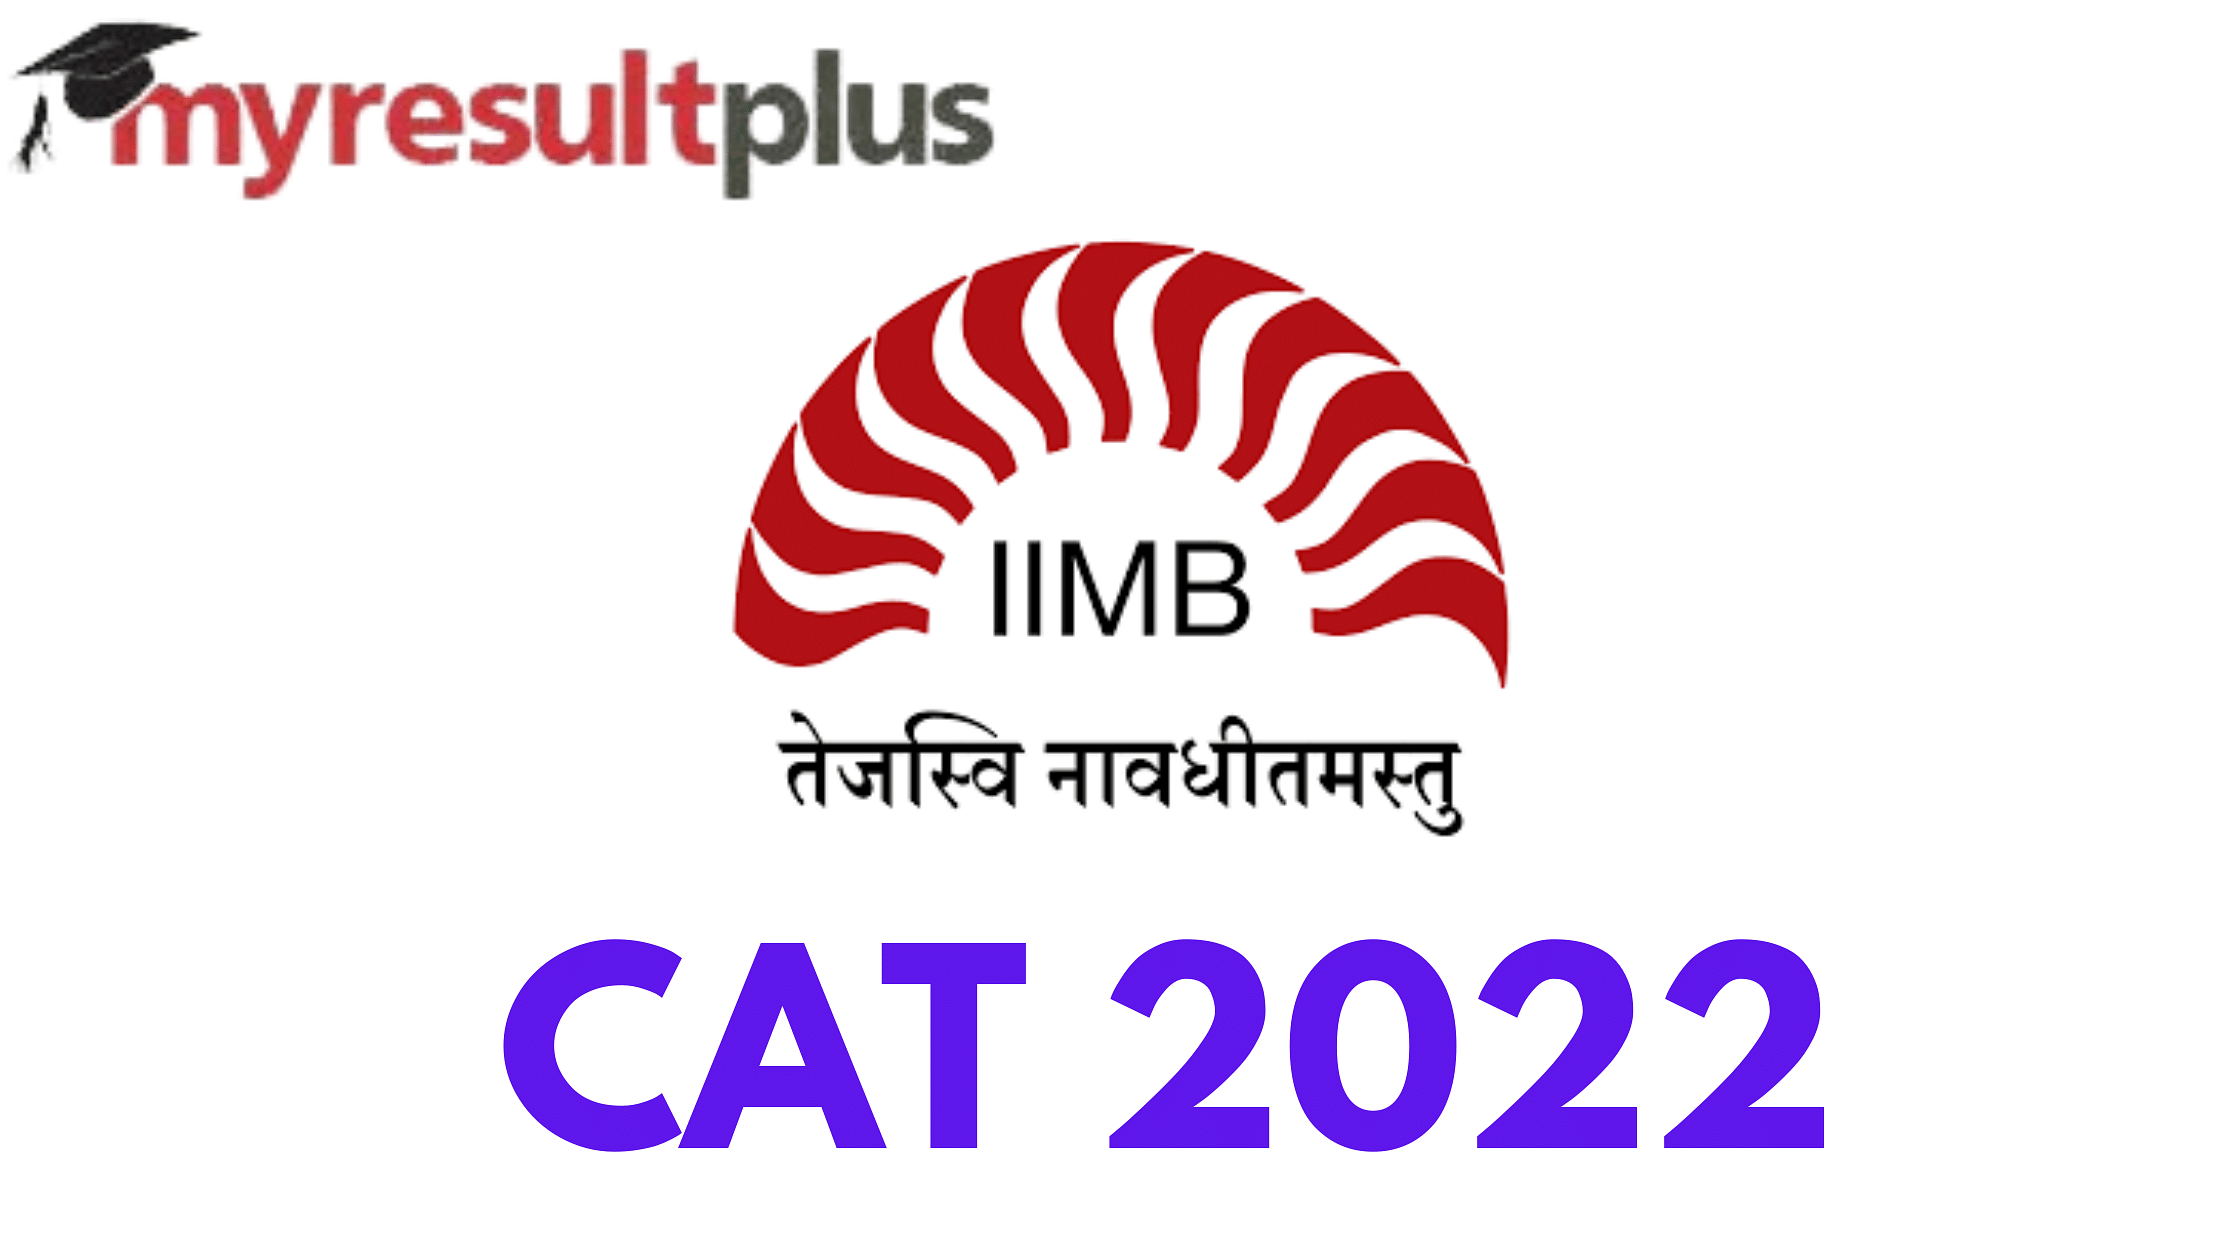 CAT 2022 Registration Window Opens, Apply Through Direct Link Here